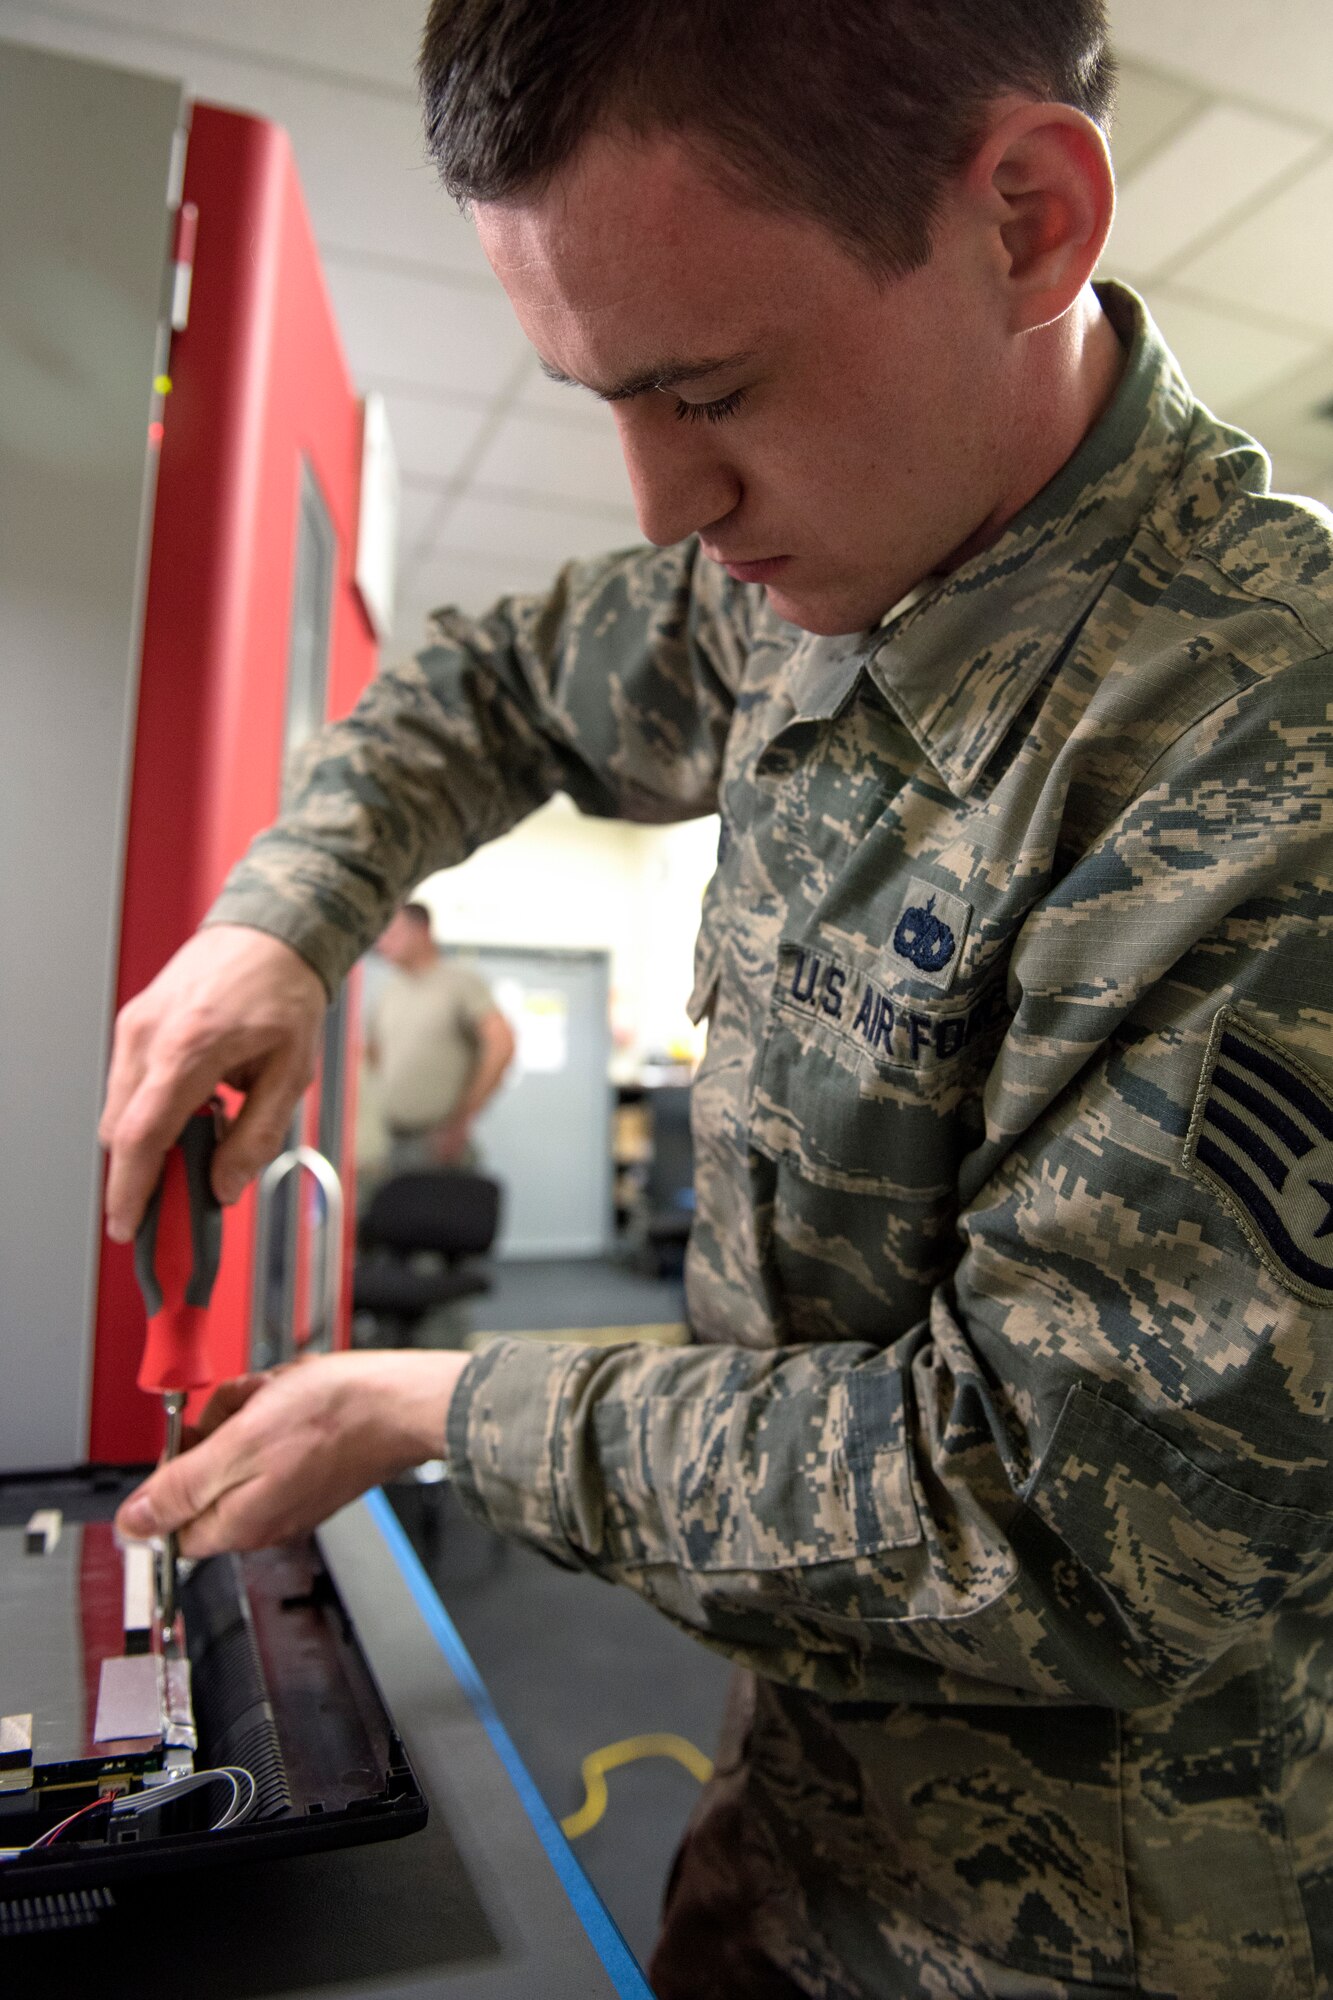 U.S. Air Force Staff Sgt. Tyler Ferris, 92nd Maintenance Group Air Force Repair Enhancement Program technician, repairs a computer monitor at Fairchild Air Force Base, Washington, March 20, 2019. AFREP has collected desktop monitors from across the base to repair and distribute back into workstations. Each one cuts costs, time and doesn’t add to a growing pile of electronics waste that is a growing ecological issue in an ever more technological world. (U.S. Air Force photo by Airman 1st Class Whitney Laine)